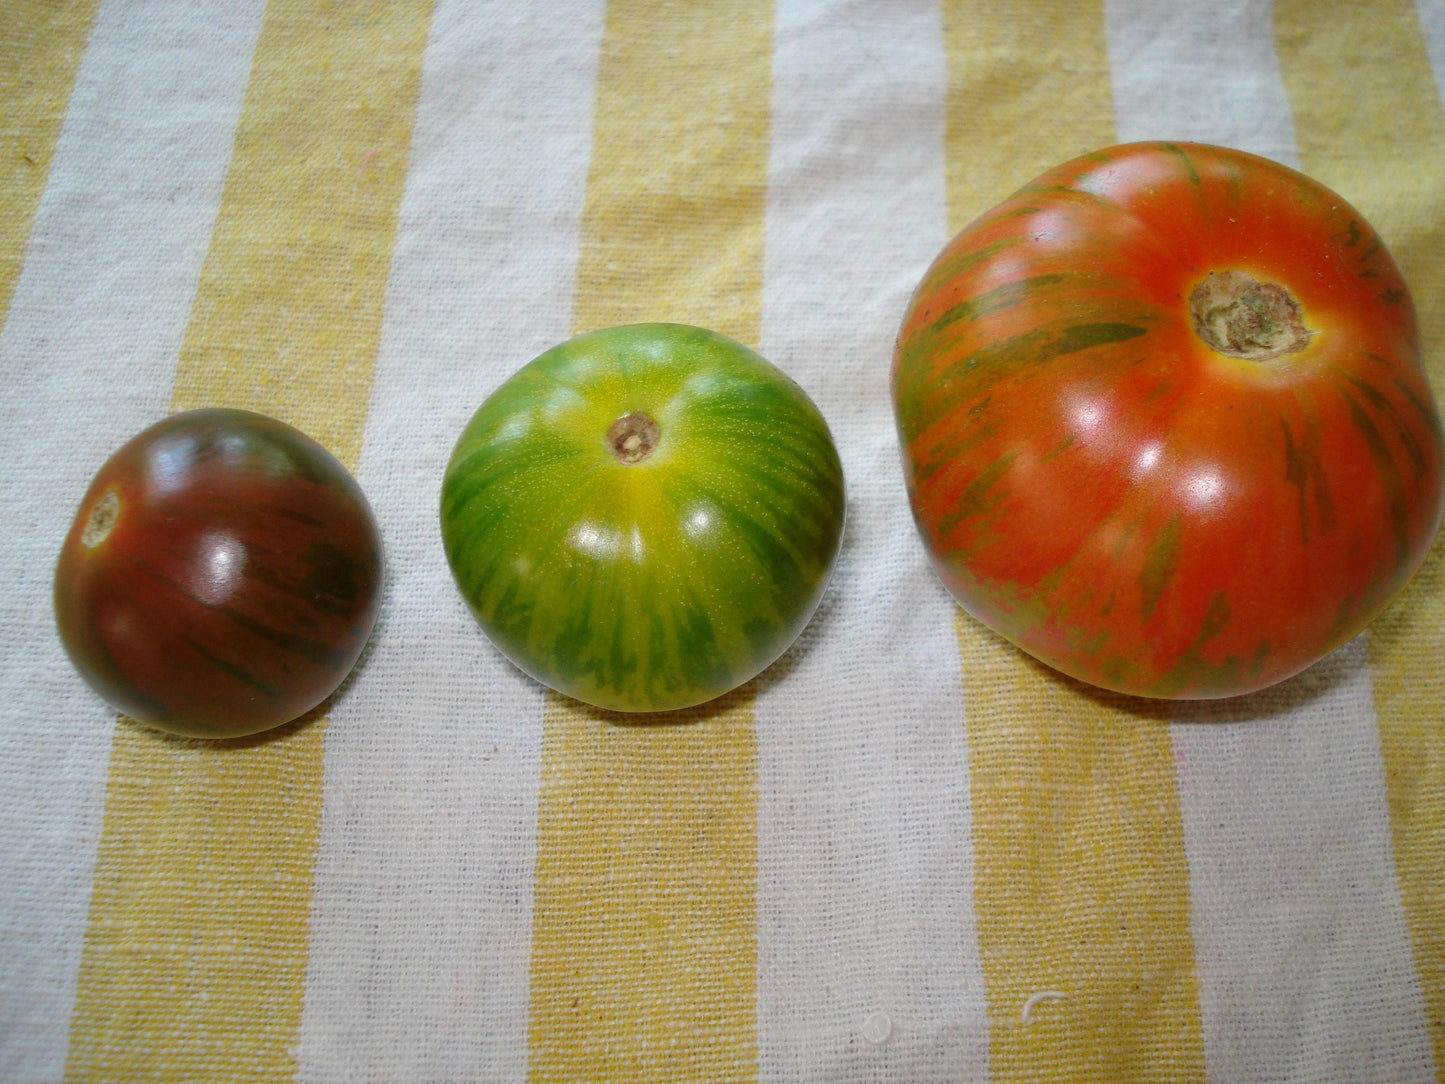 50 CHOCOLATE STRIPES TOMATO Brown with Green Lycopersicon Fruit Vegetable Seeds